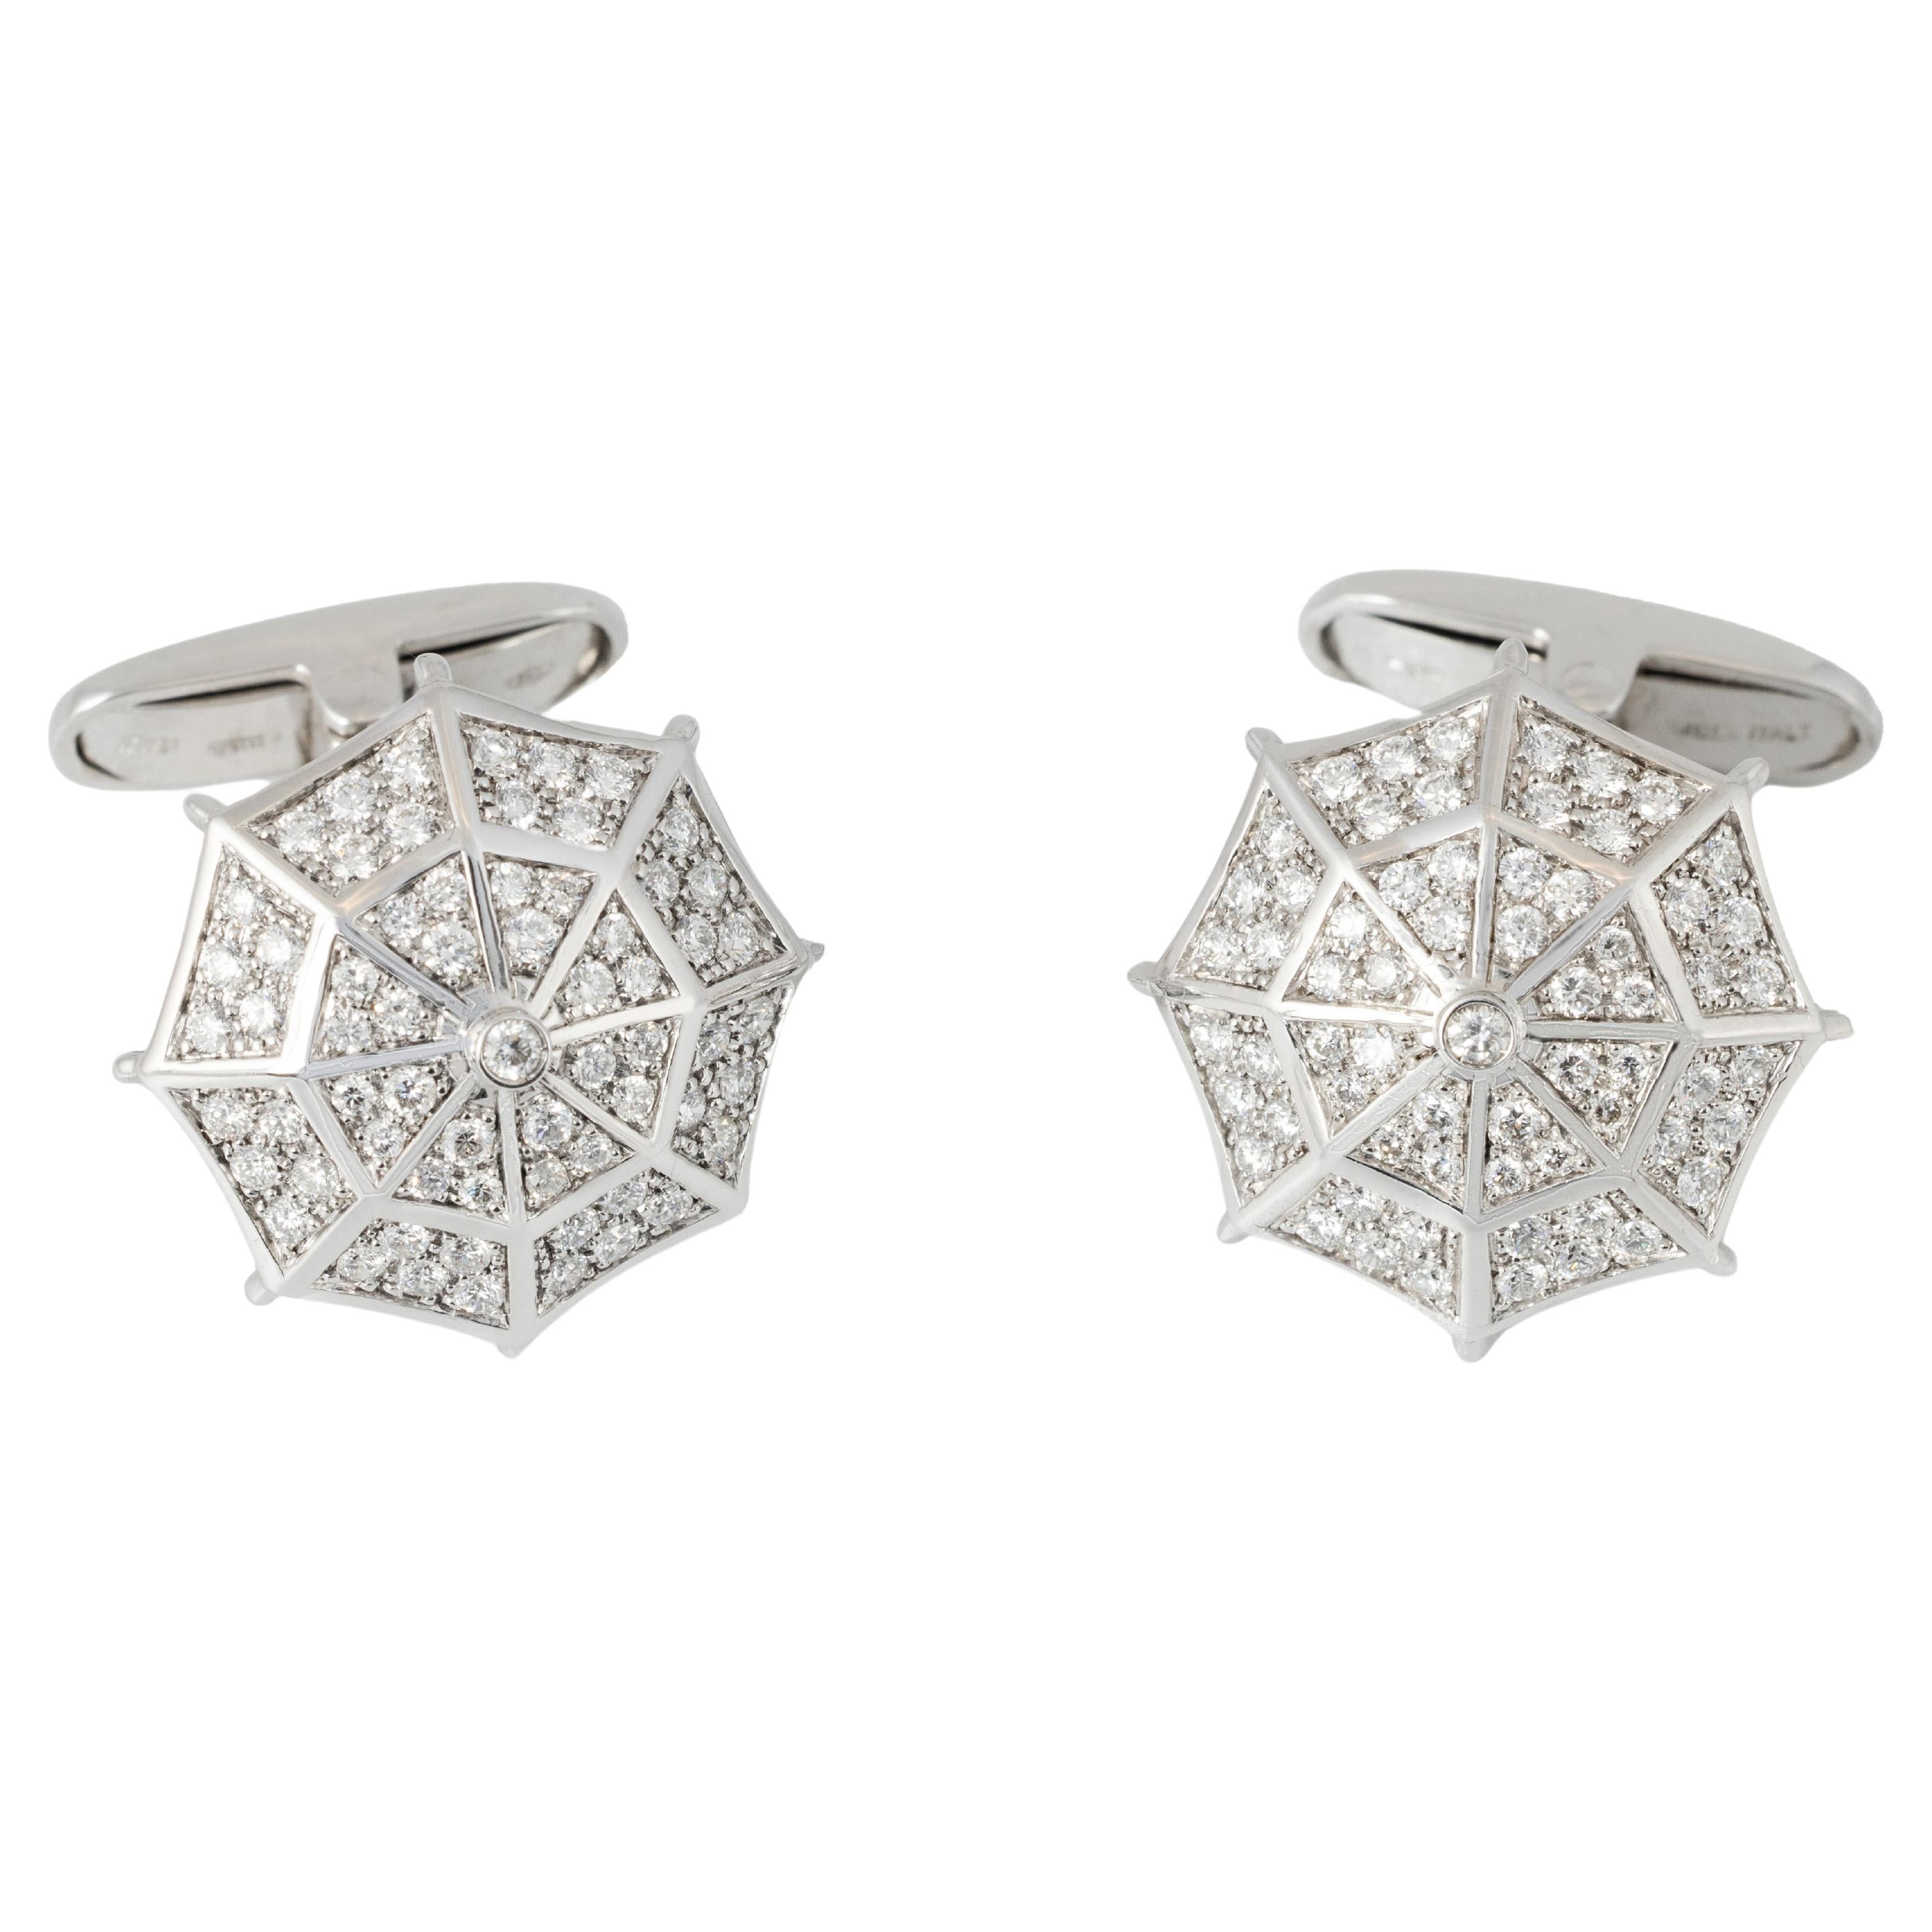 "Costis" Umbrella Collection Cufflinks WG - Pave' with 1.19 carats Diamonds  For Sale